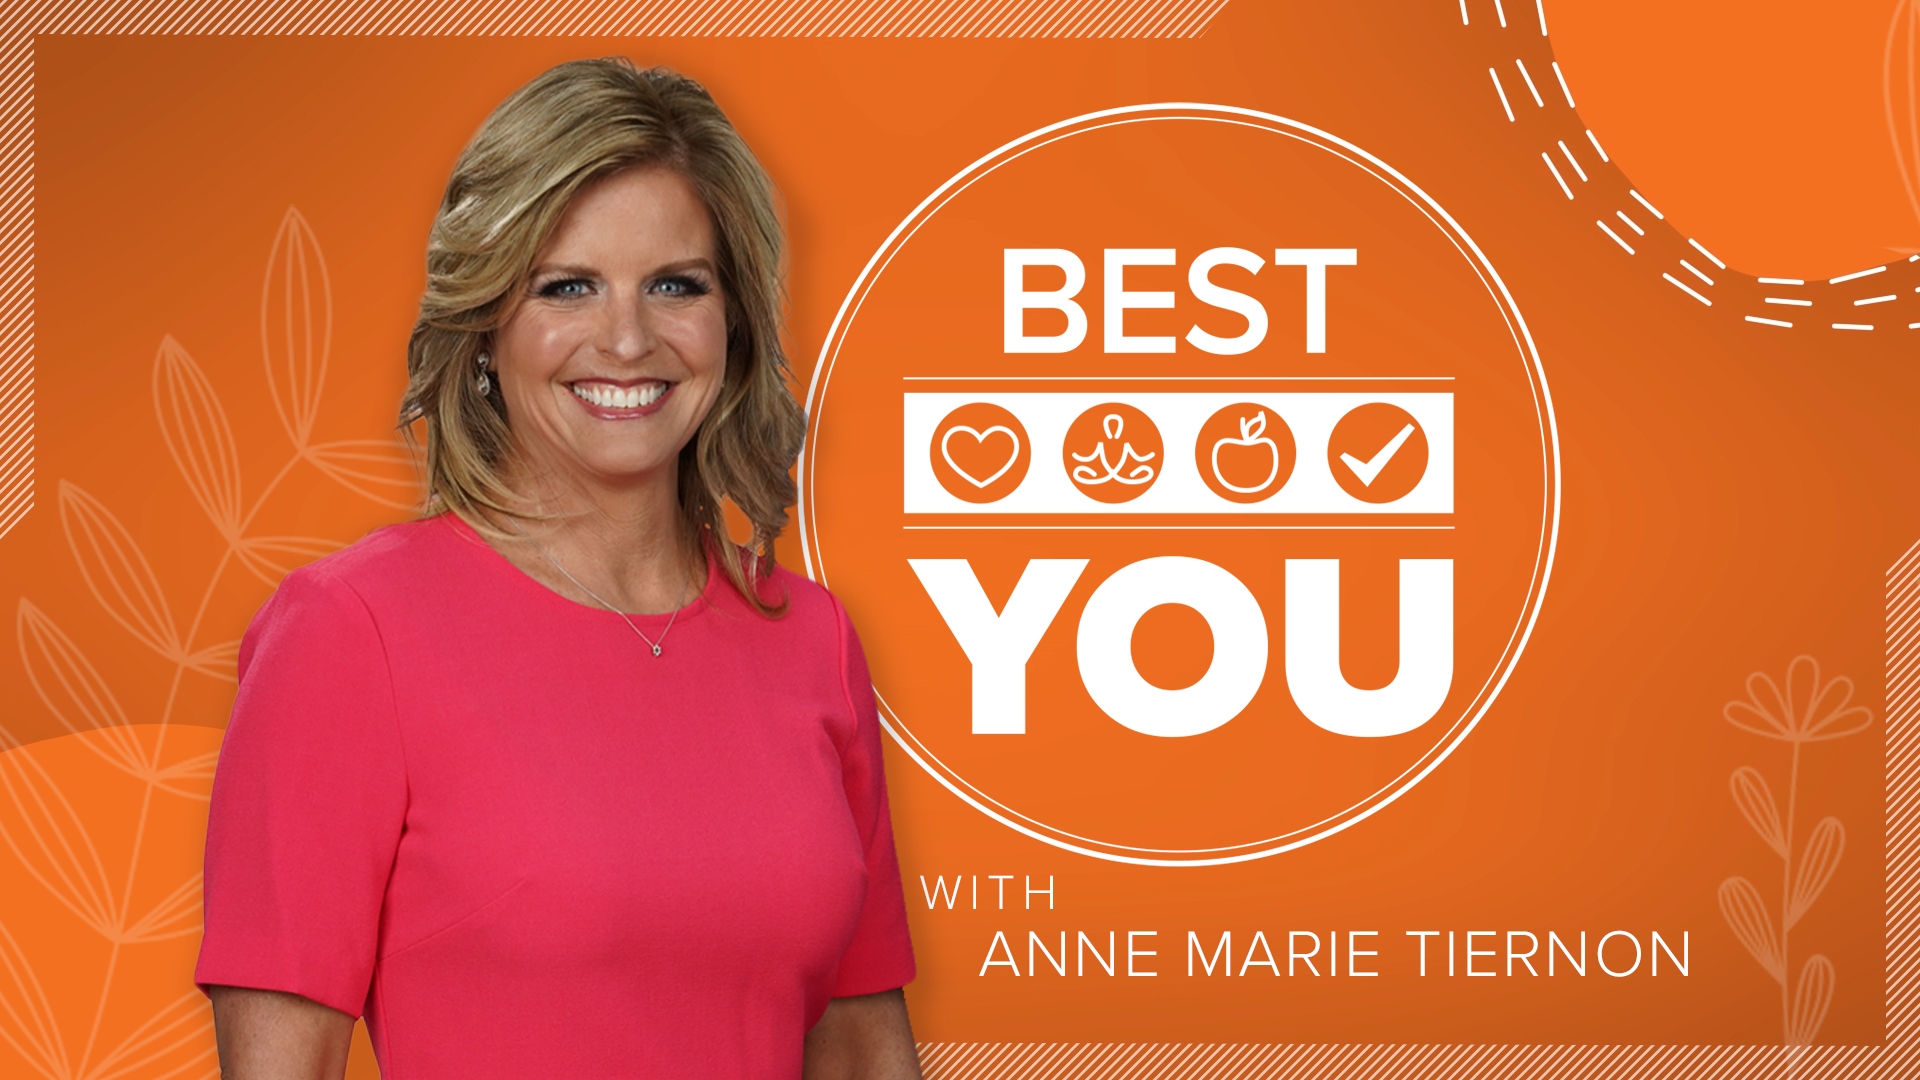 Improve your life with 'Best You'